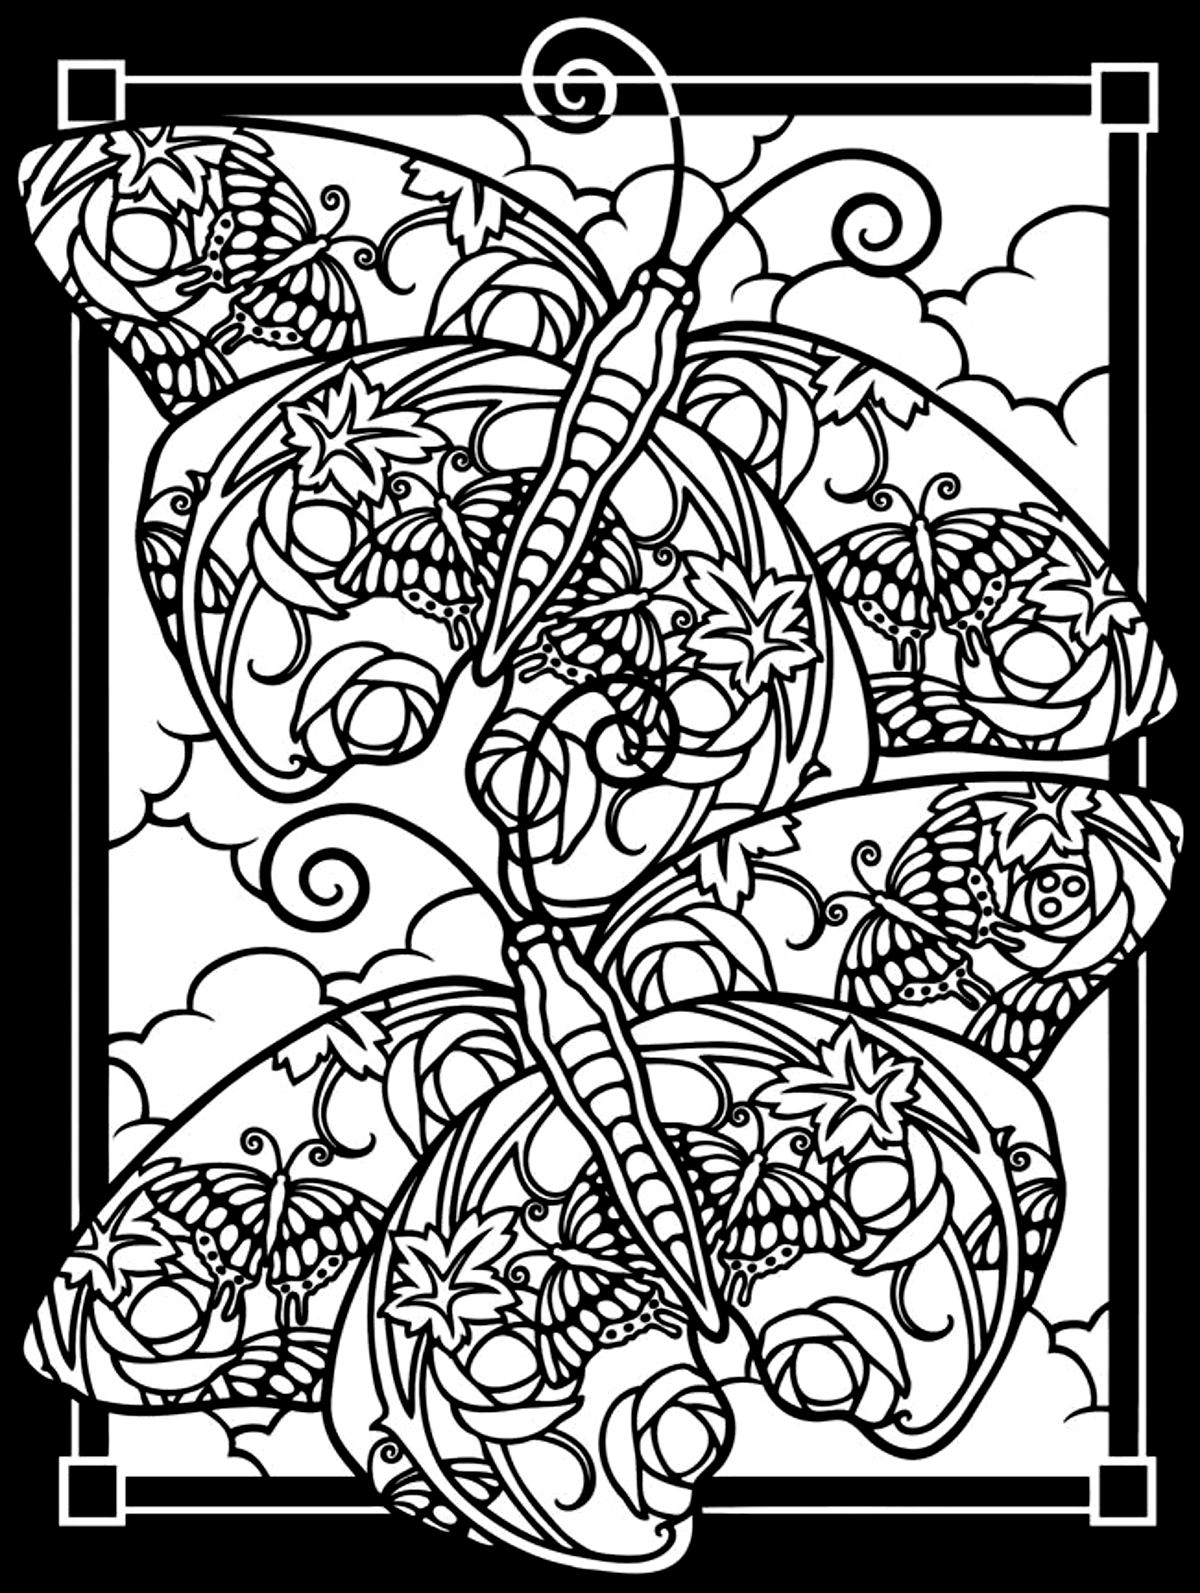 Fun butterflies coloring pages to print and color